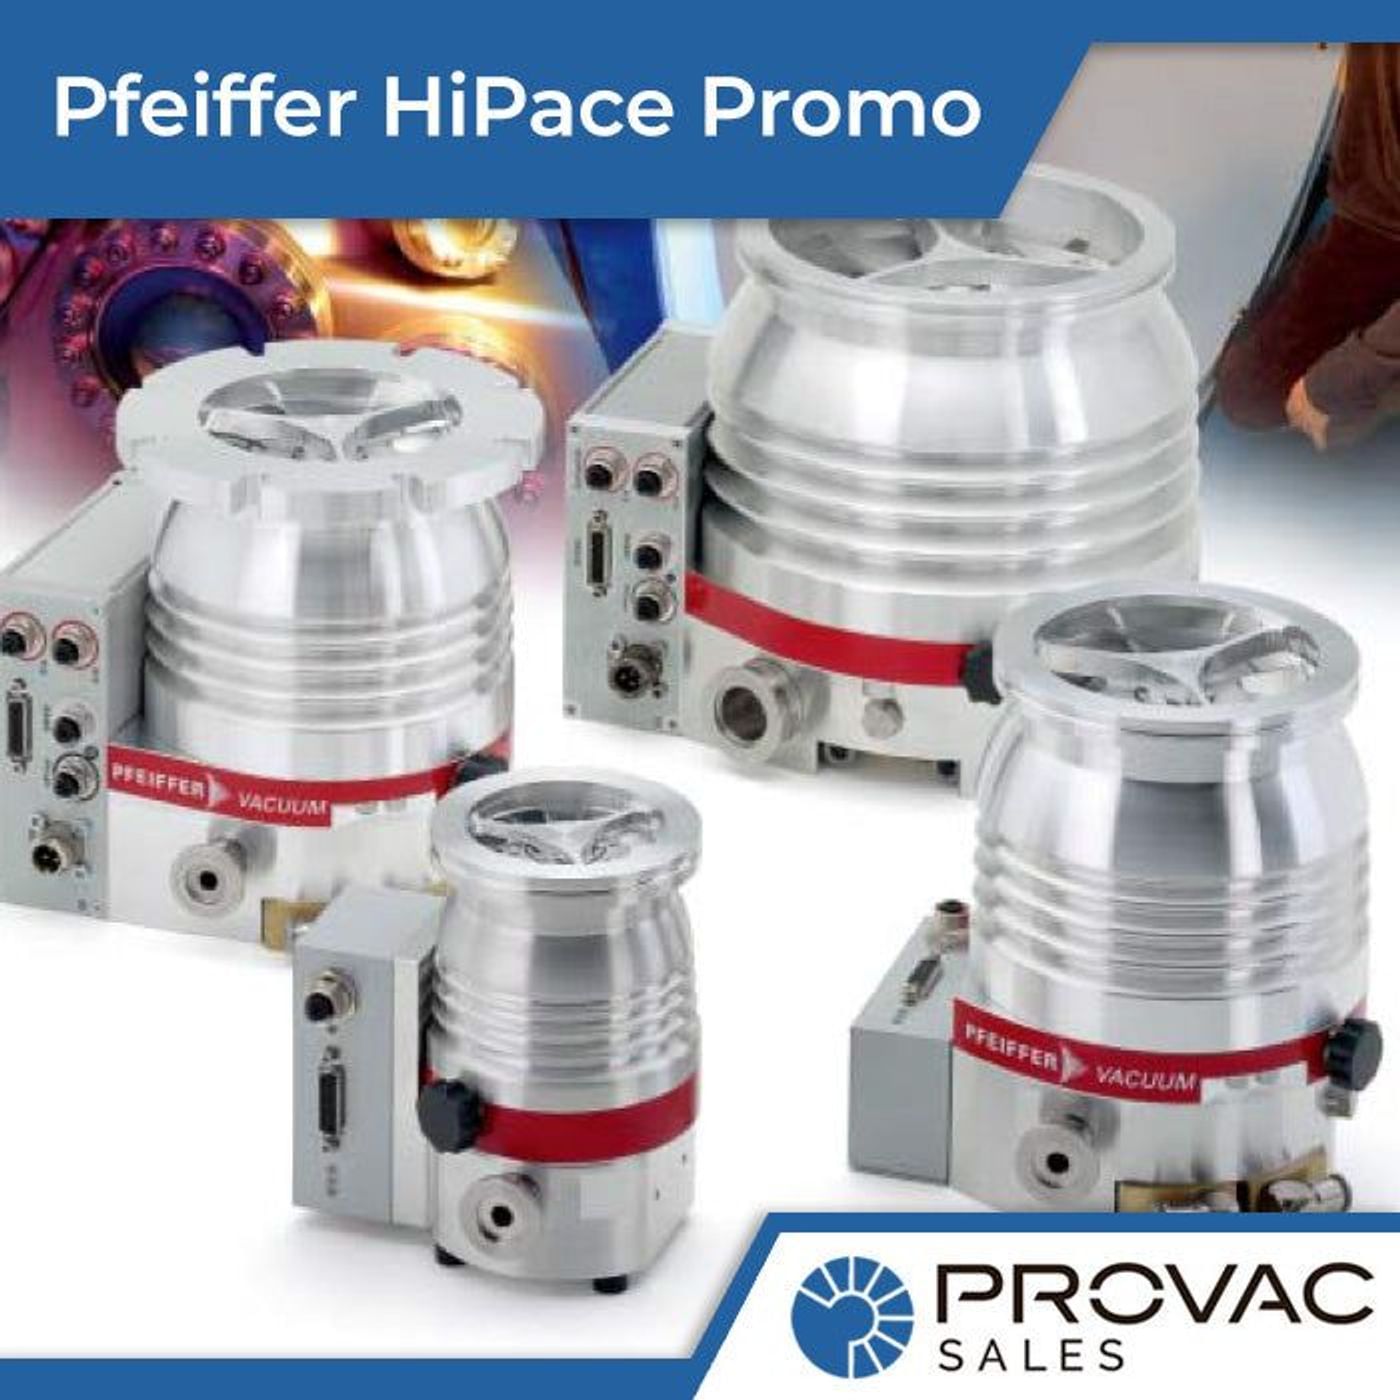 *Special Promotion* Pfeiffer HiPace Turbo Pumps: Select Models